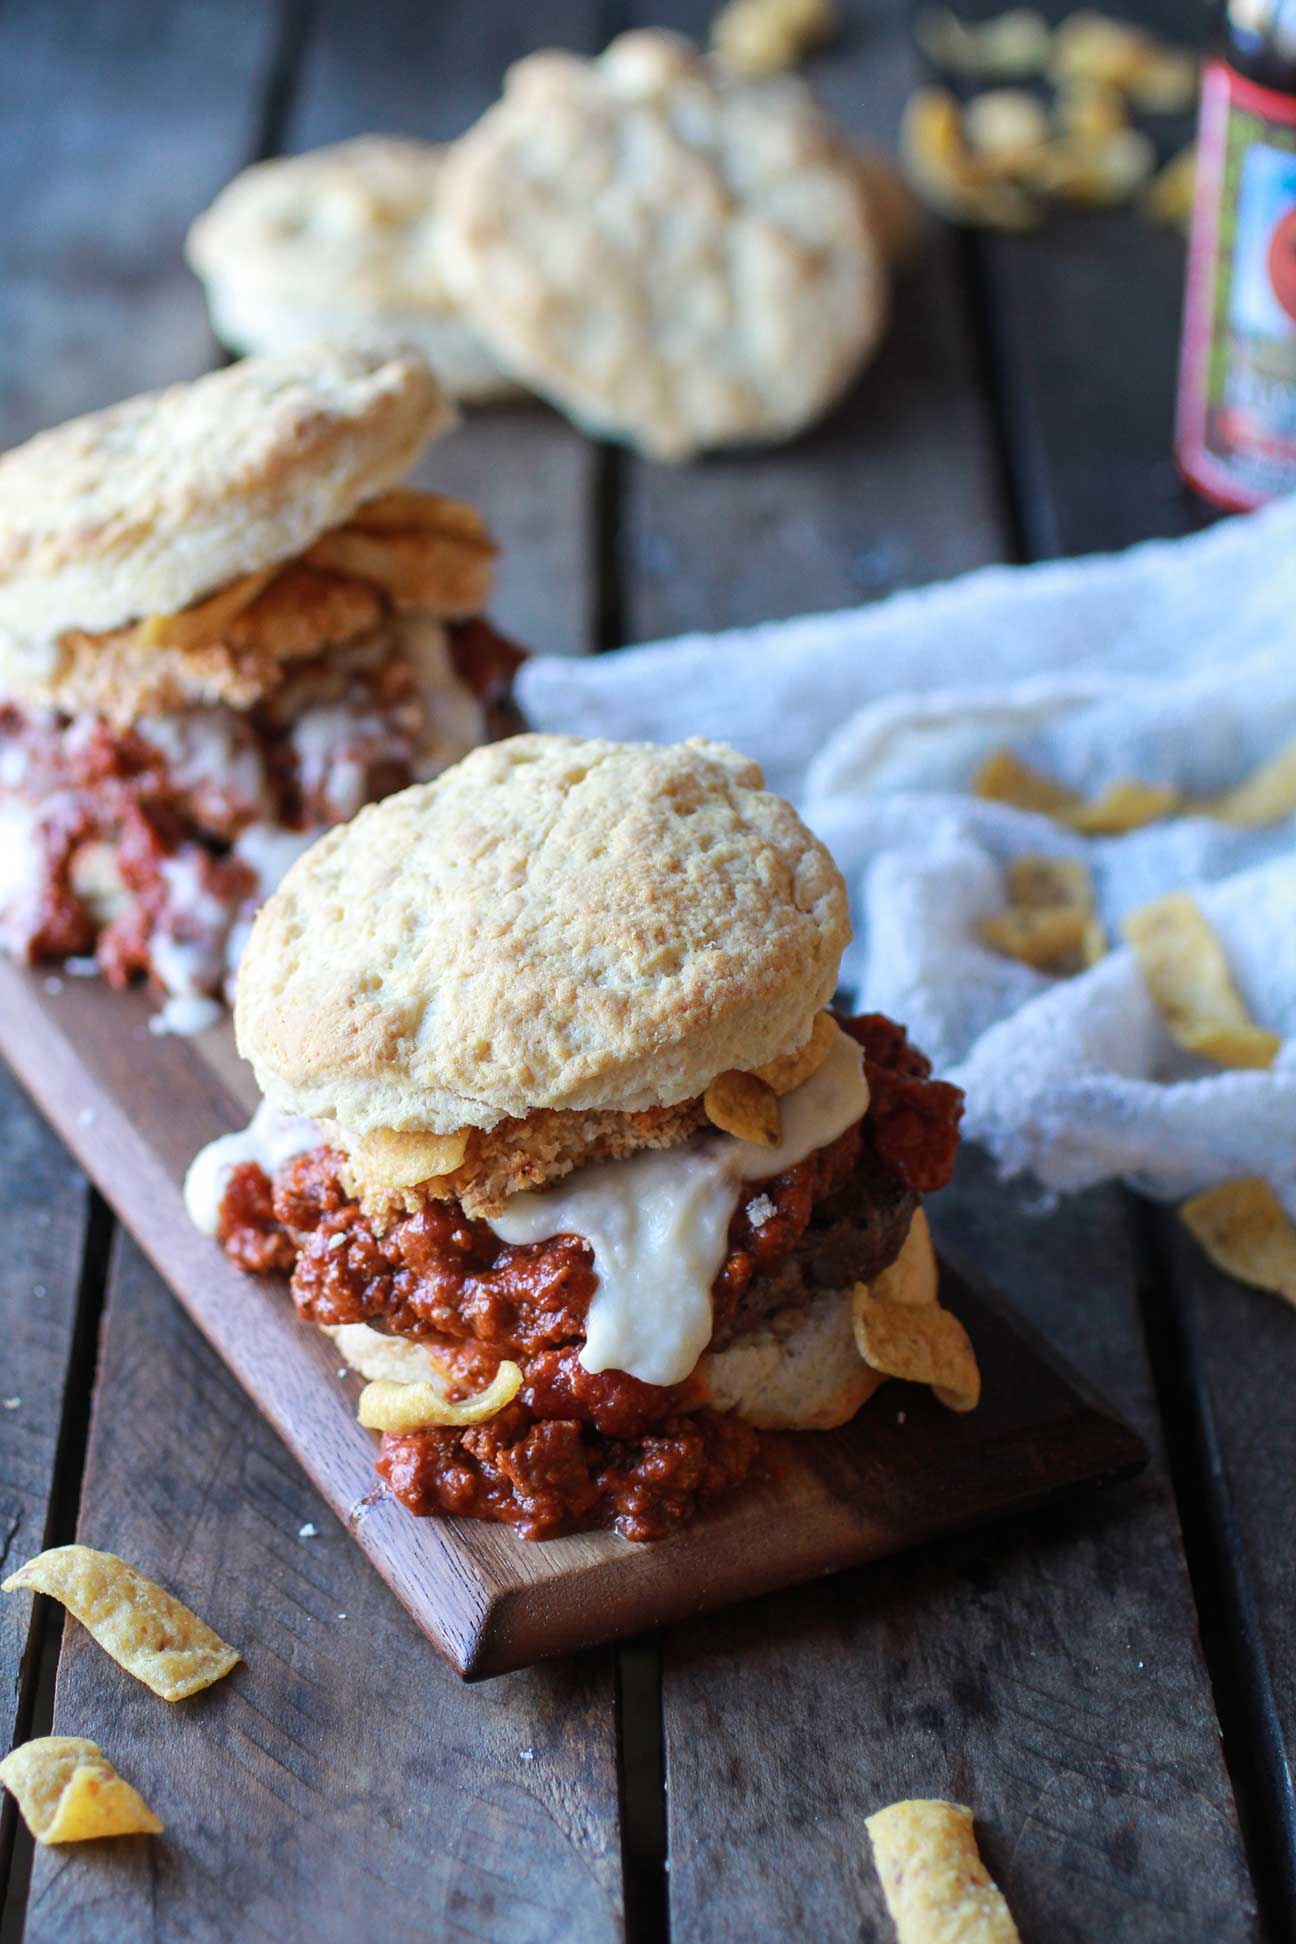 The-Ultimate-Game-Day-Chili-Cheese-Sauce-Burger-8